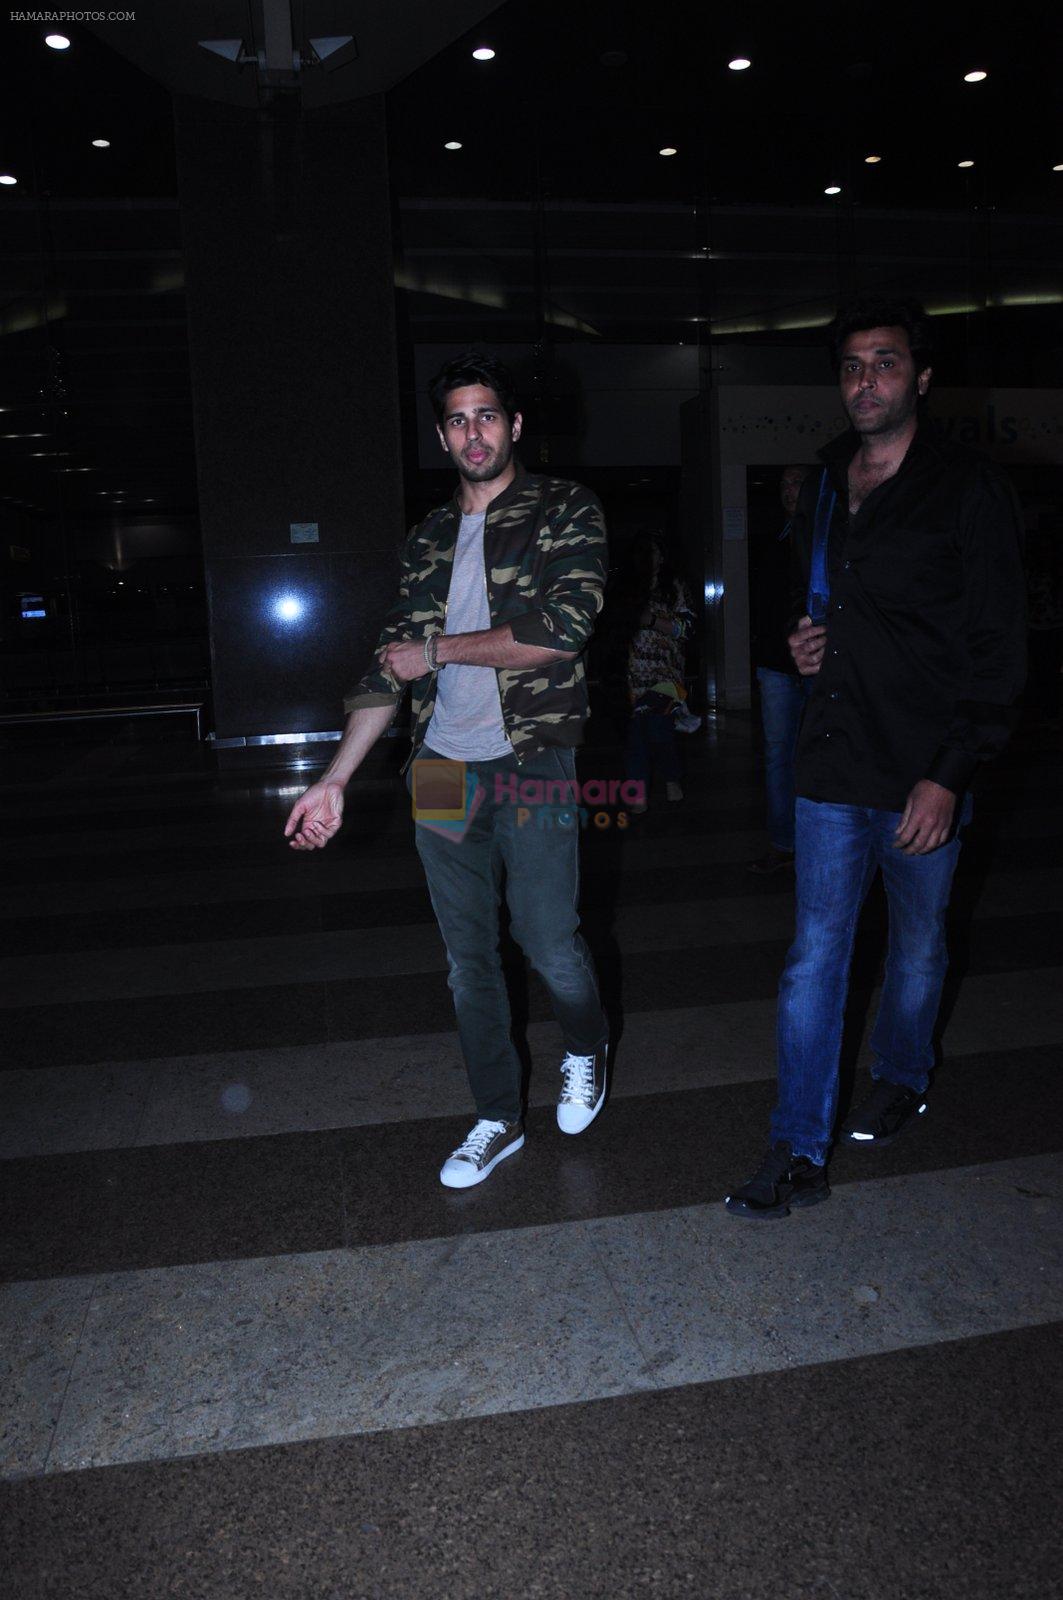 Sidharth Malhotra return from Kapoor & Sons promotions on 10th March 2016